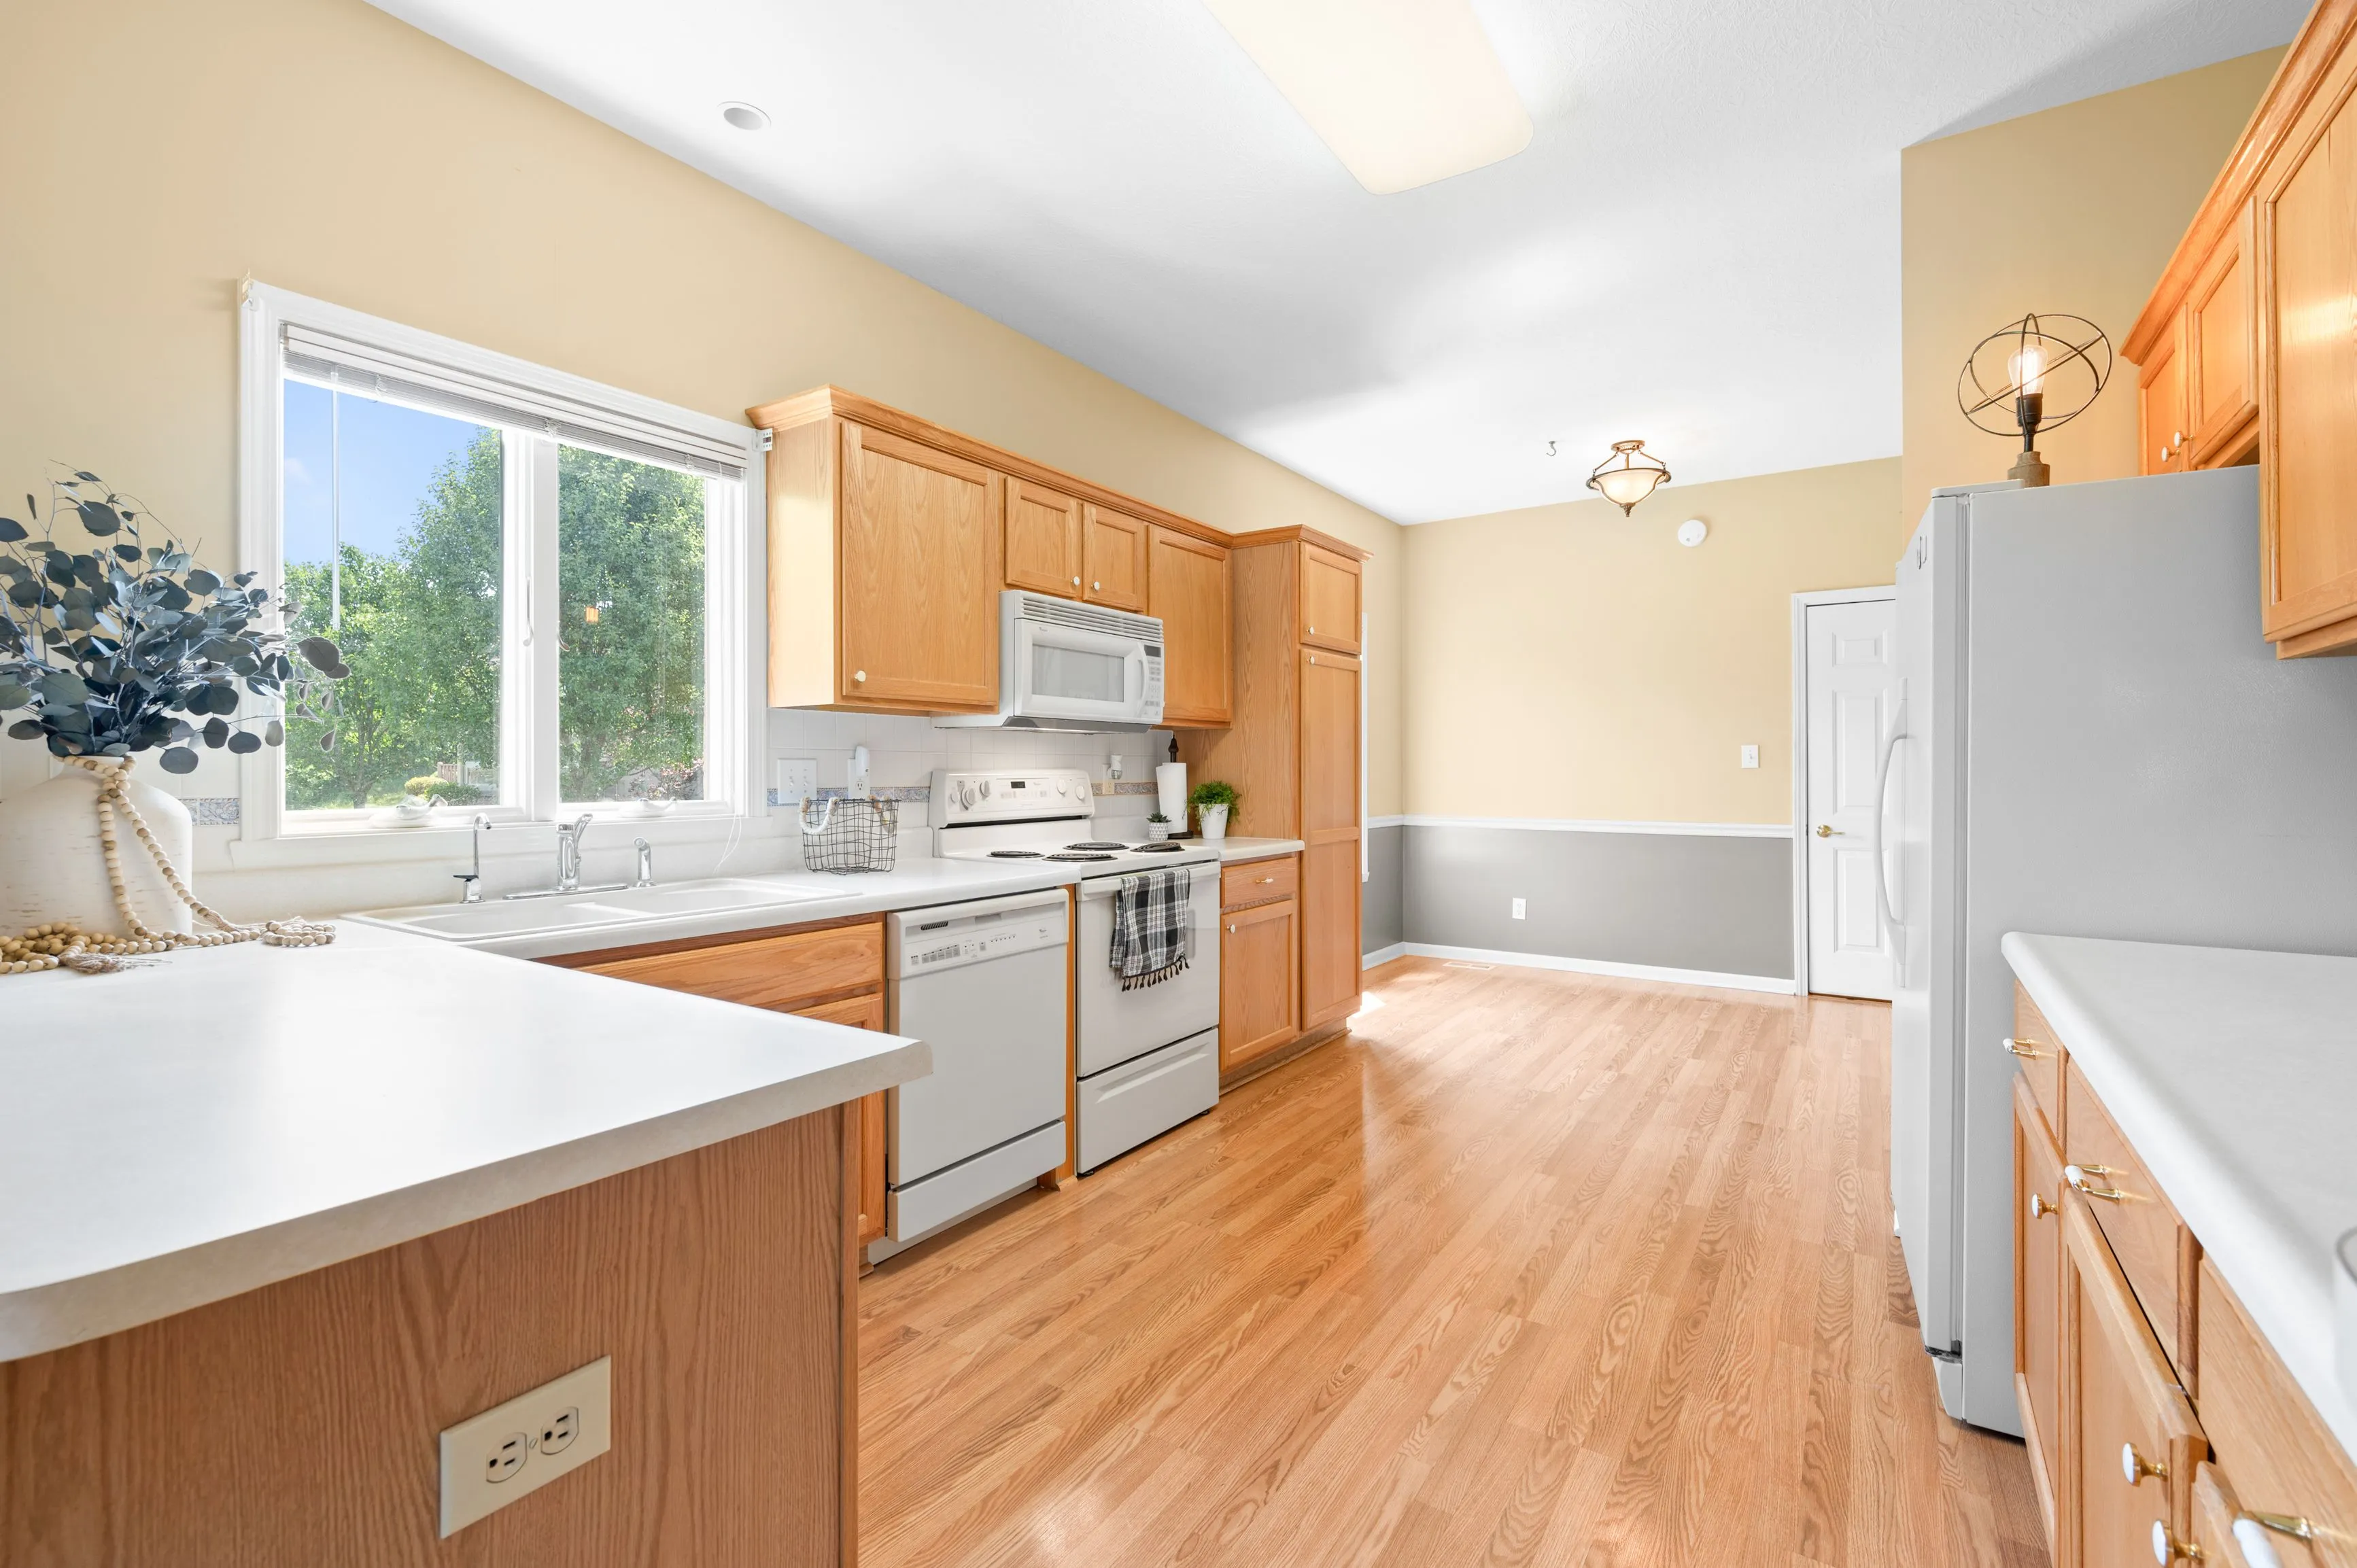 Bright and spacious kitchen interior with wooden cabinets, white appliances, hardwood flooring, and a large window with a garden view.